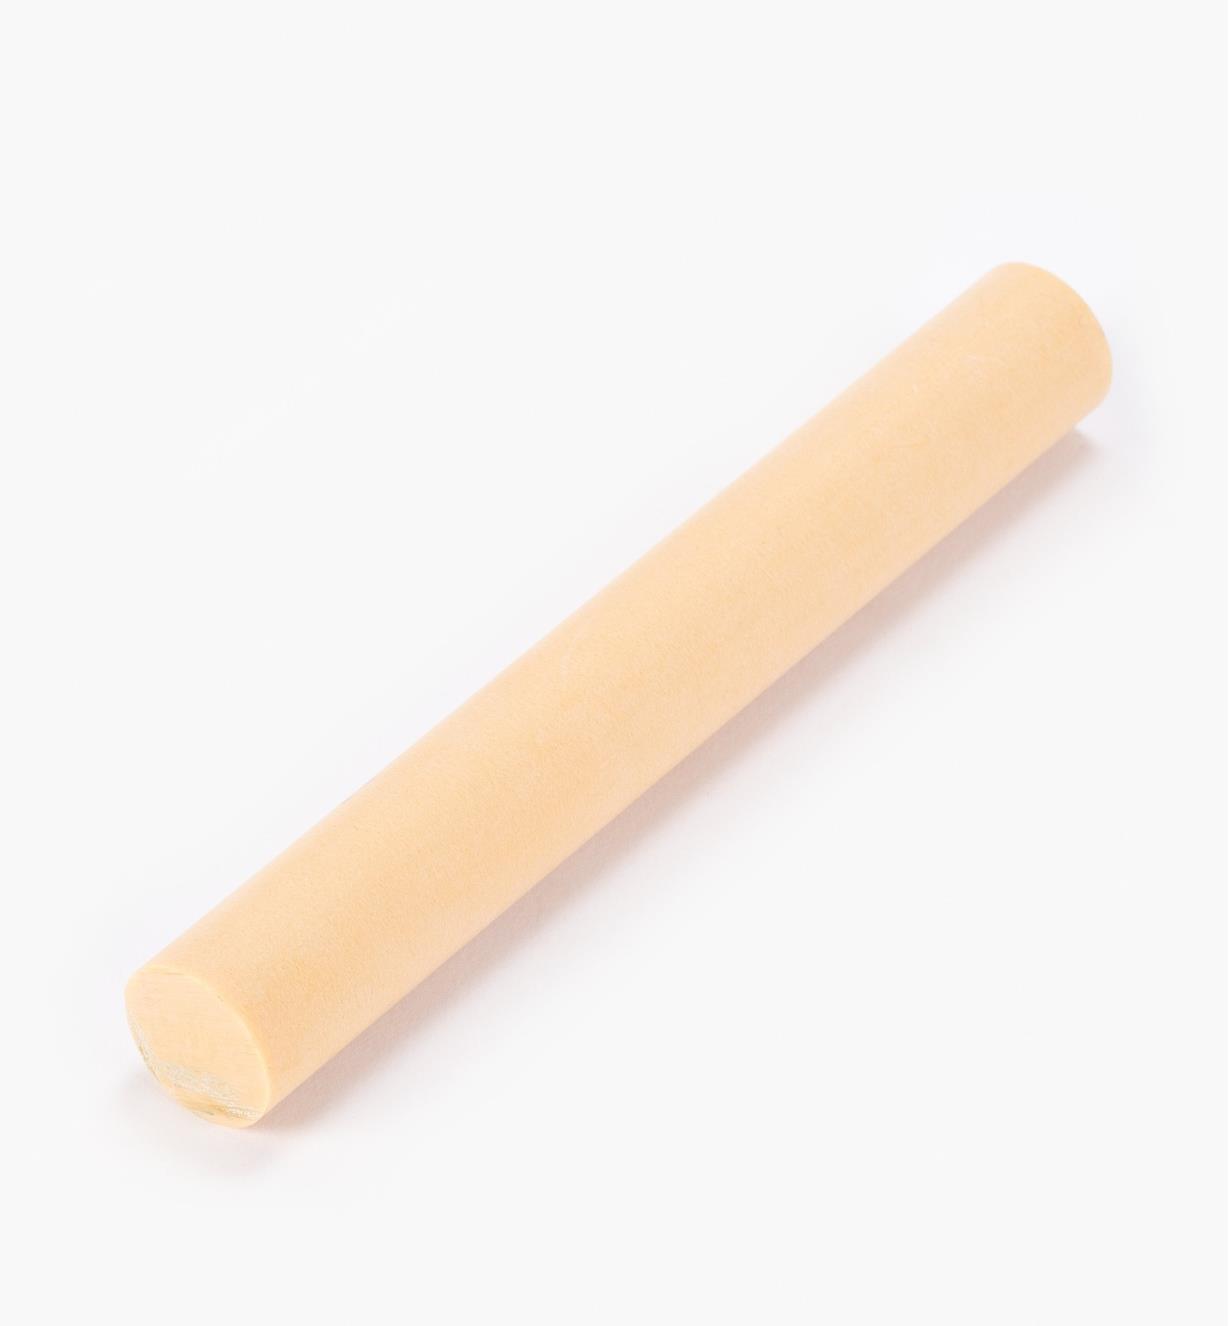 87K2001 - Simulated Aged Ivory Rod, 20mm x 150mm